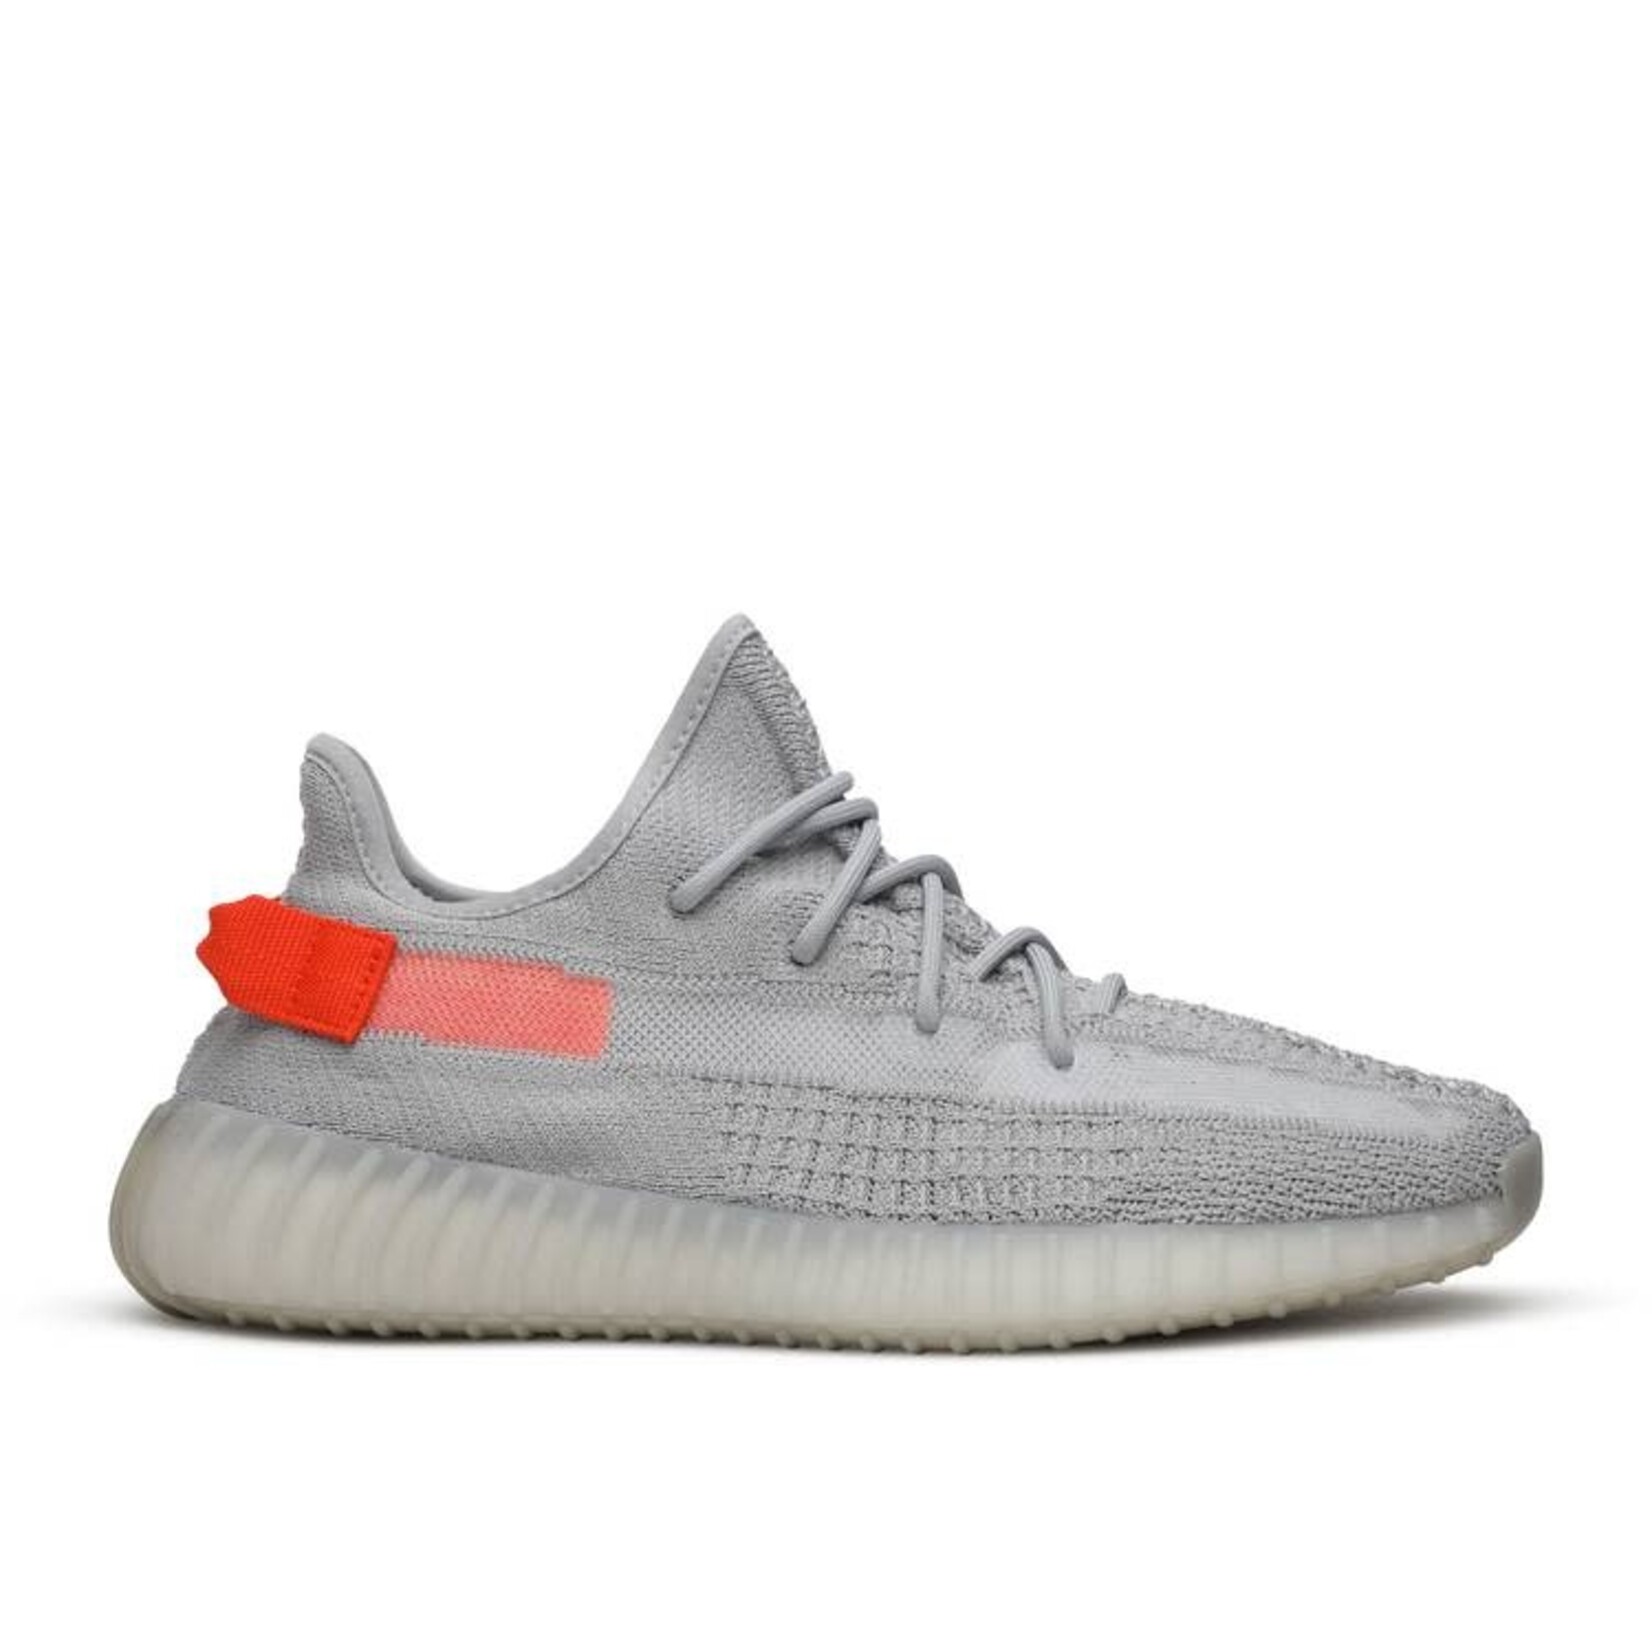 Adidas adidas Yeezy Boost 350 V2 Tail Light Size 9.5, DS BRAND NEW